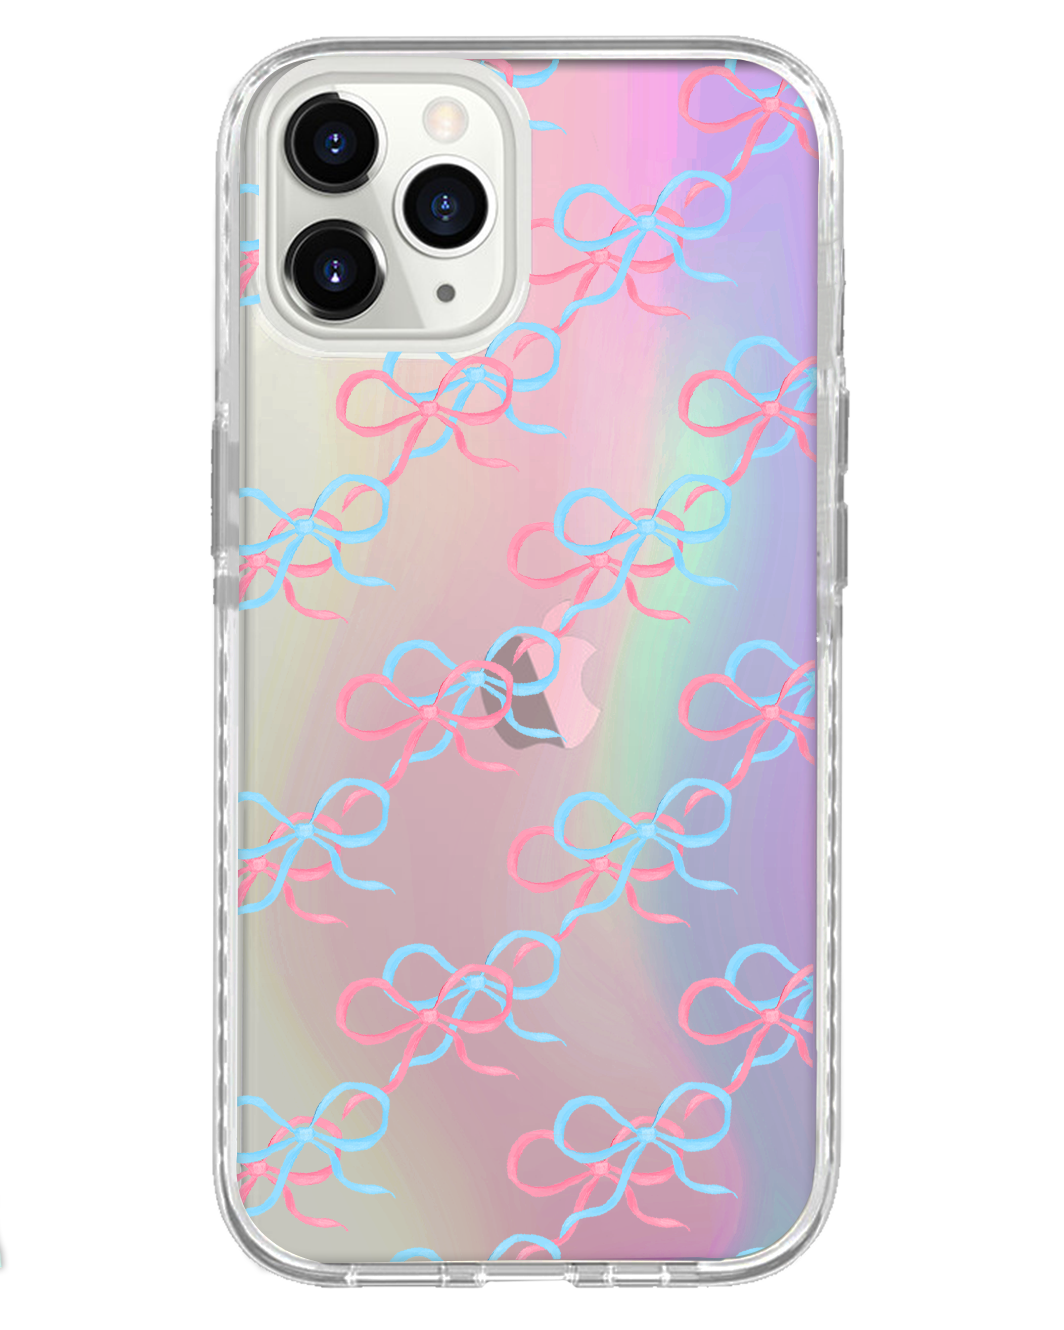 iPhone Rearguard Holo - Coquette Pink & Blue Bow